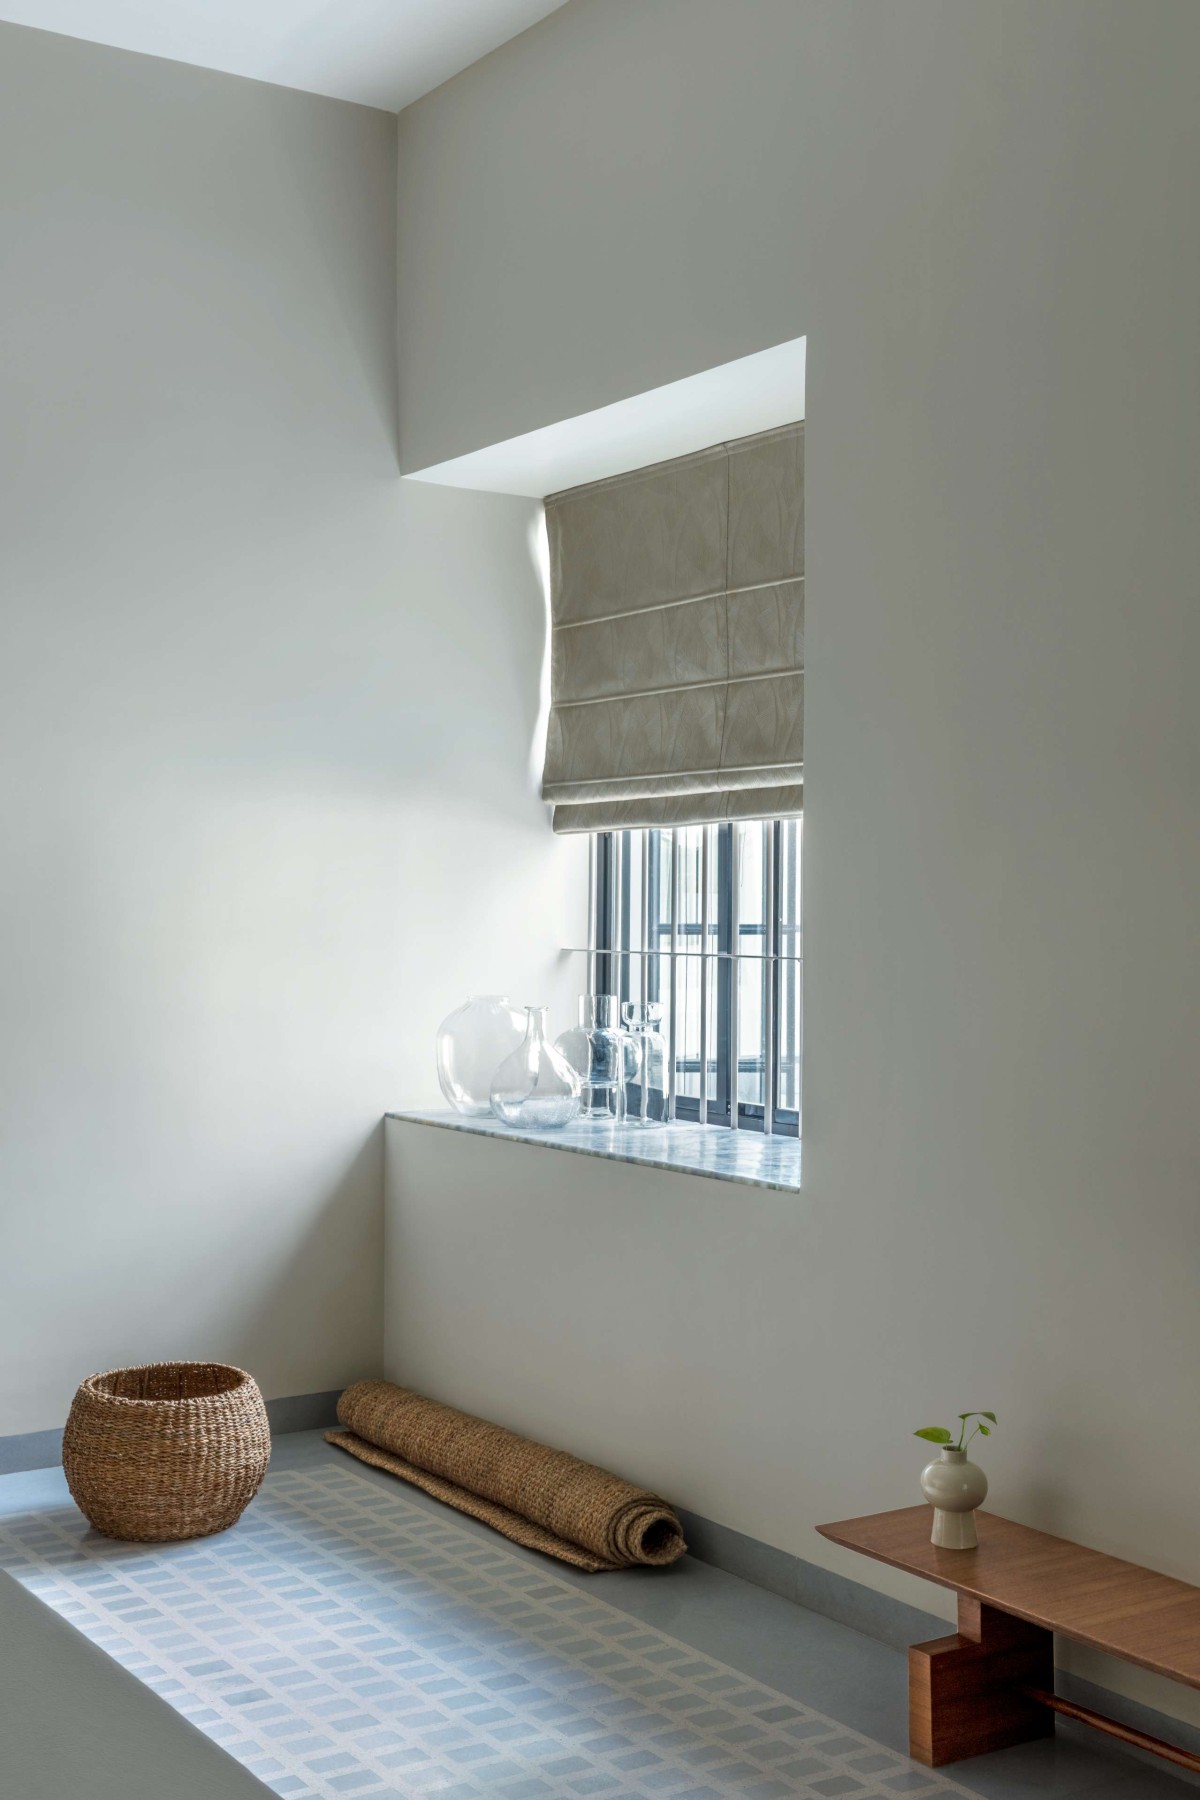 Bay Windows of The Courtyard House by Atelier Varun Goyal